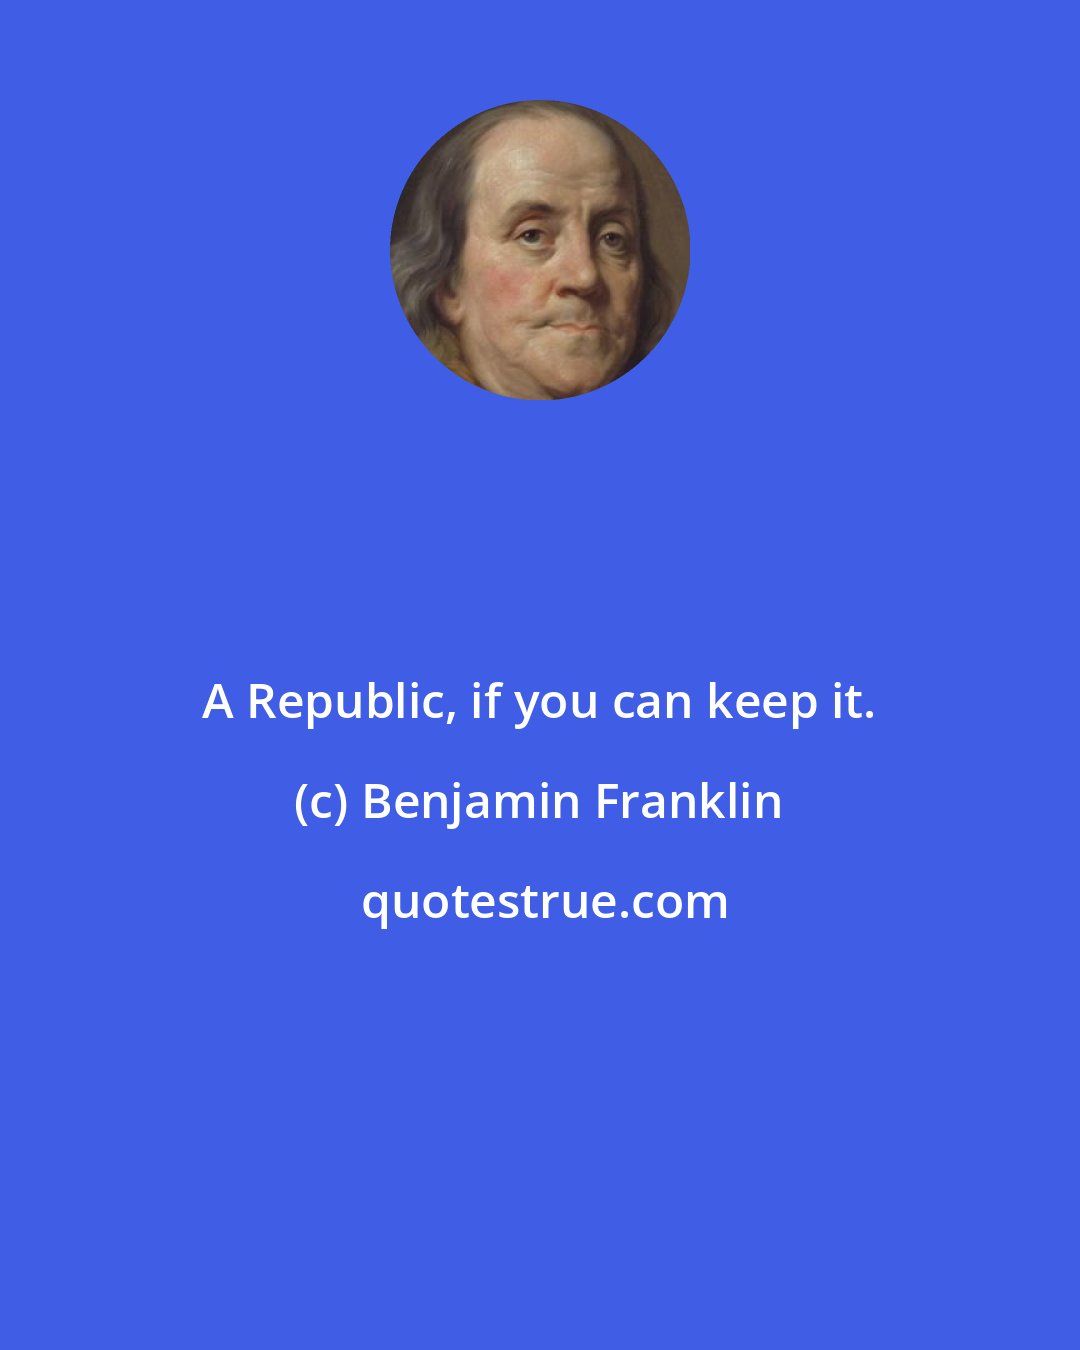 Benjamin Franklin: A Republic, if you can keep it.